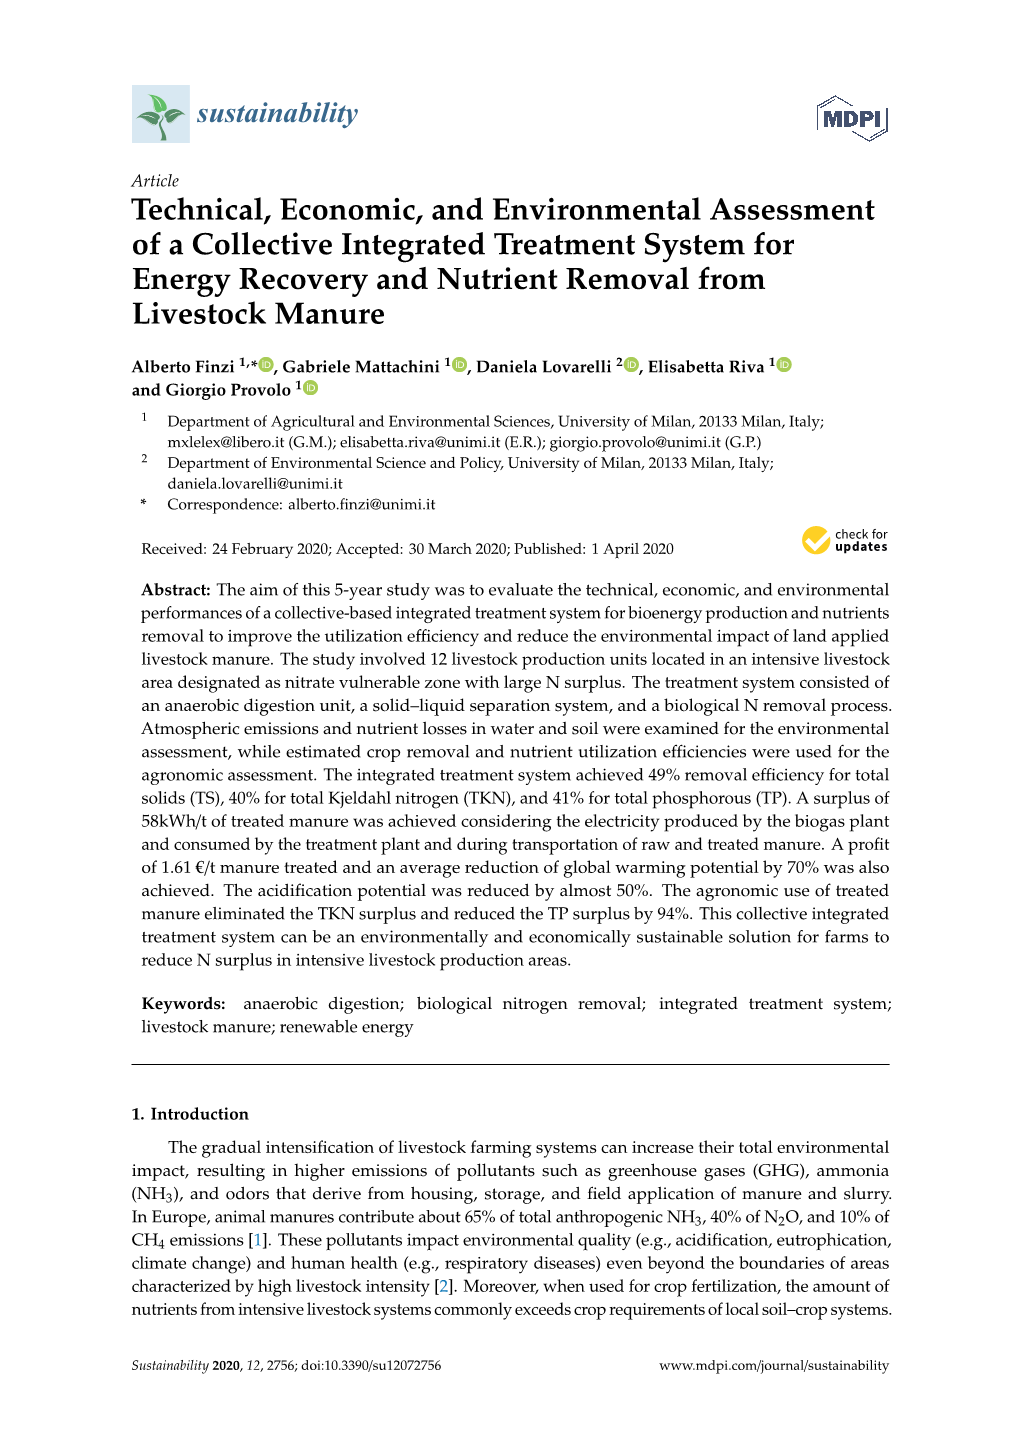 Technical, Economic, and Environmental Assessment of a Collective Integrated Treatment System for Energy Recovery and Nutrient Removal from Livestock Manure